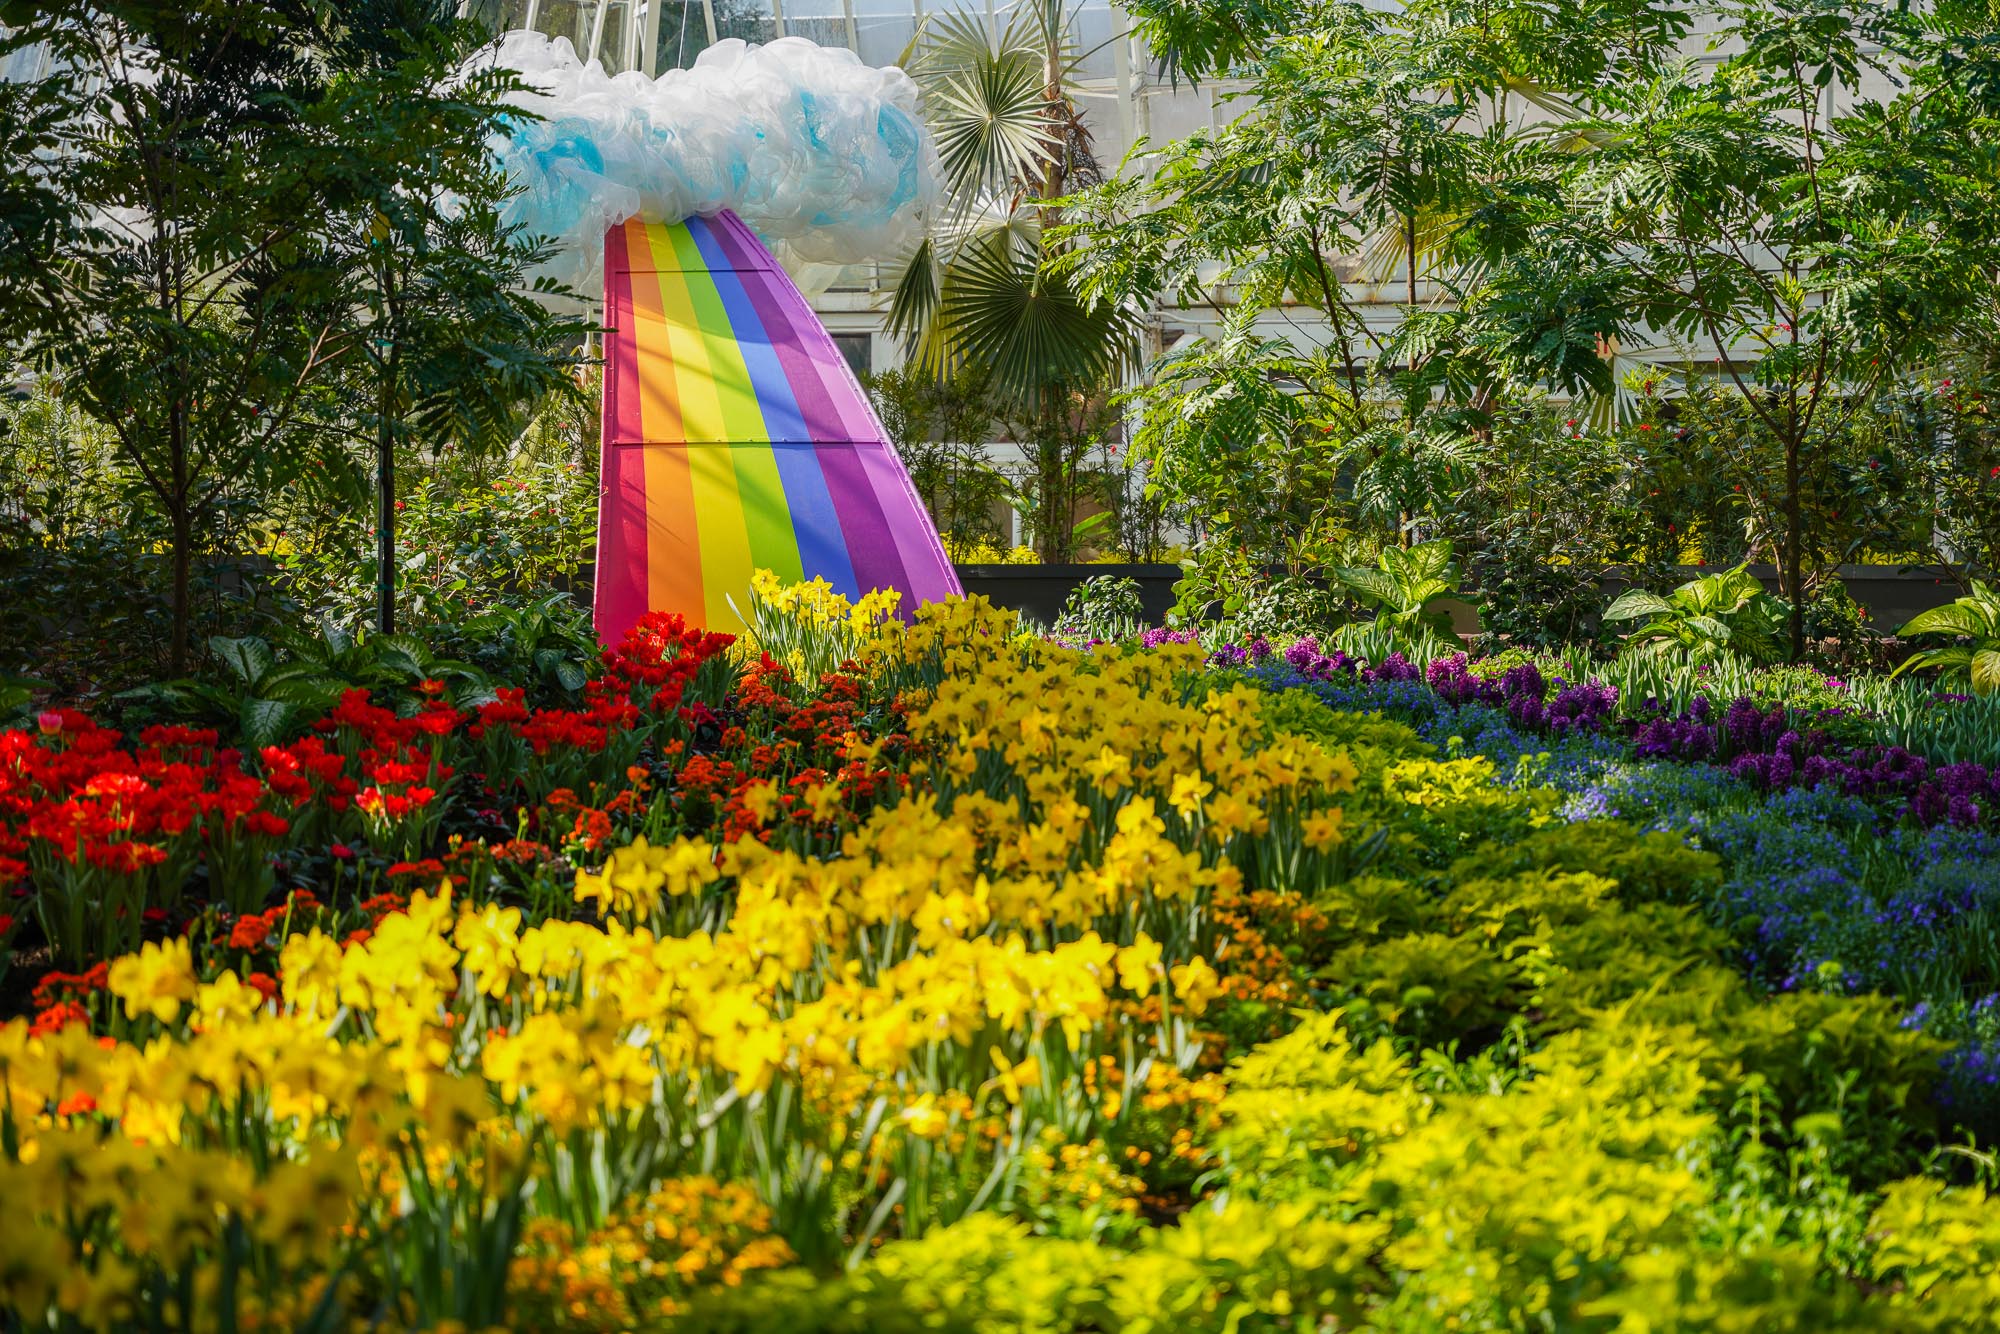 Phipps Conservatory's Spring Flower Show Sunshine and Rainbows